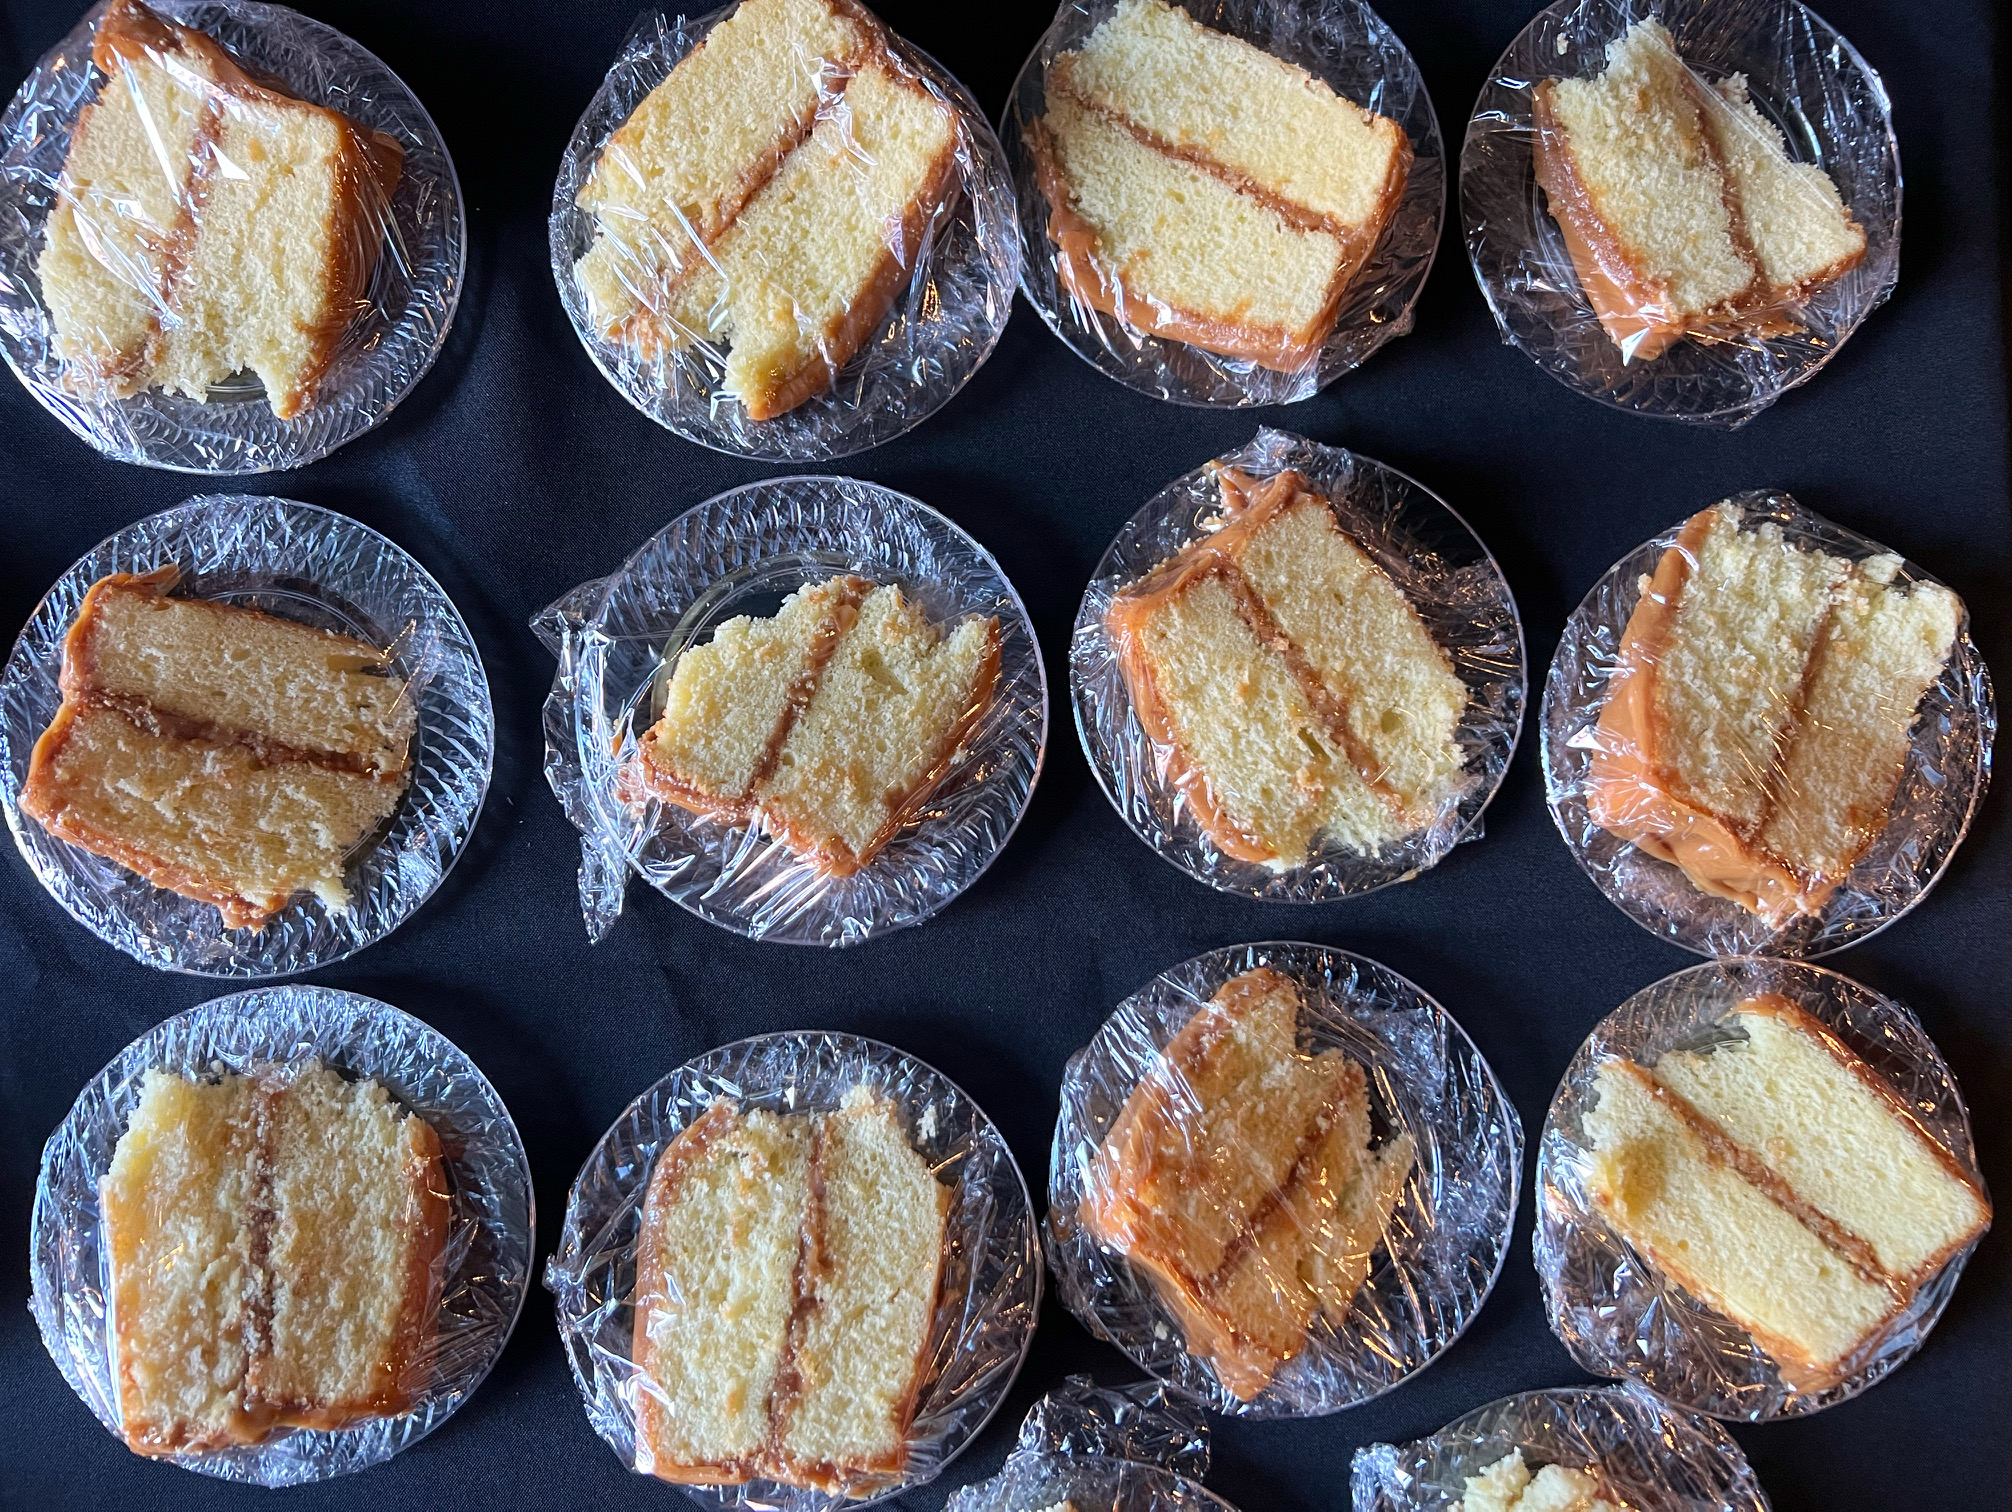 Several individual slices of cake packaged to go at Neil St. Blues' Sunday brunch buffet.